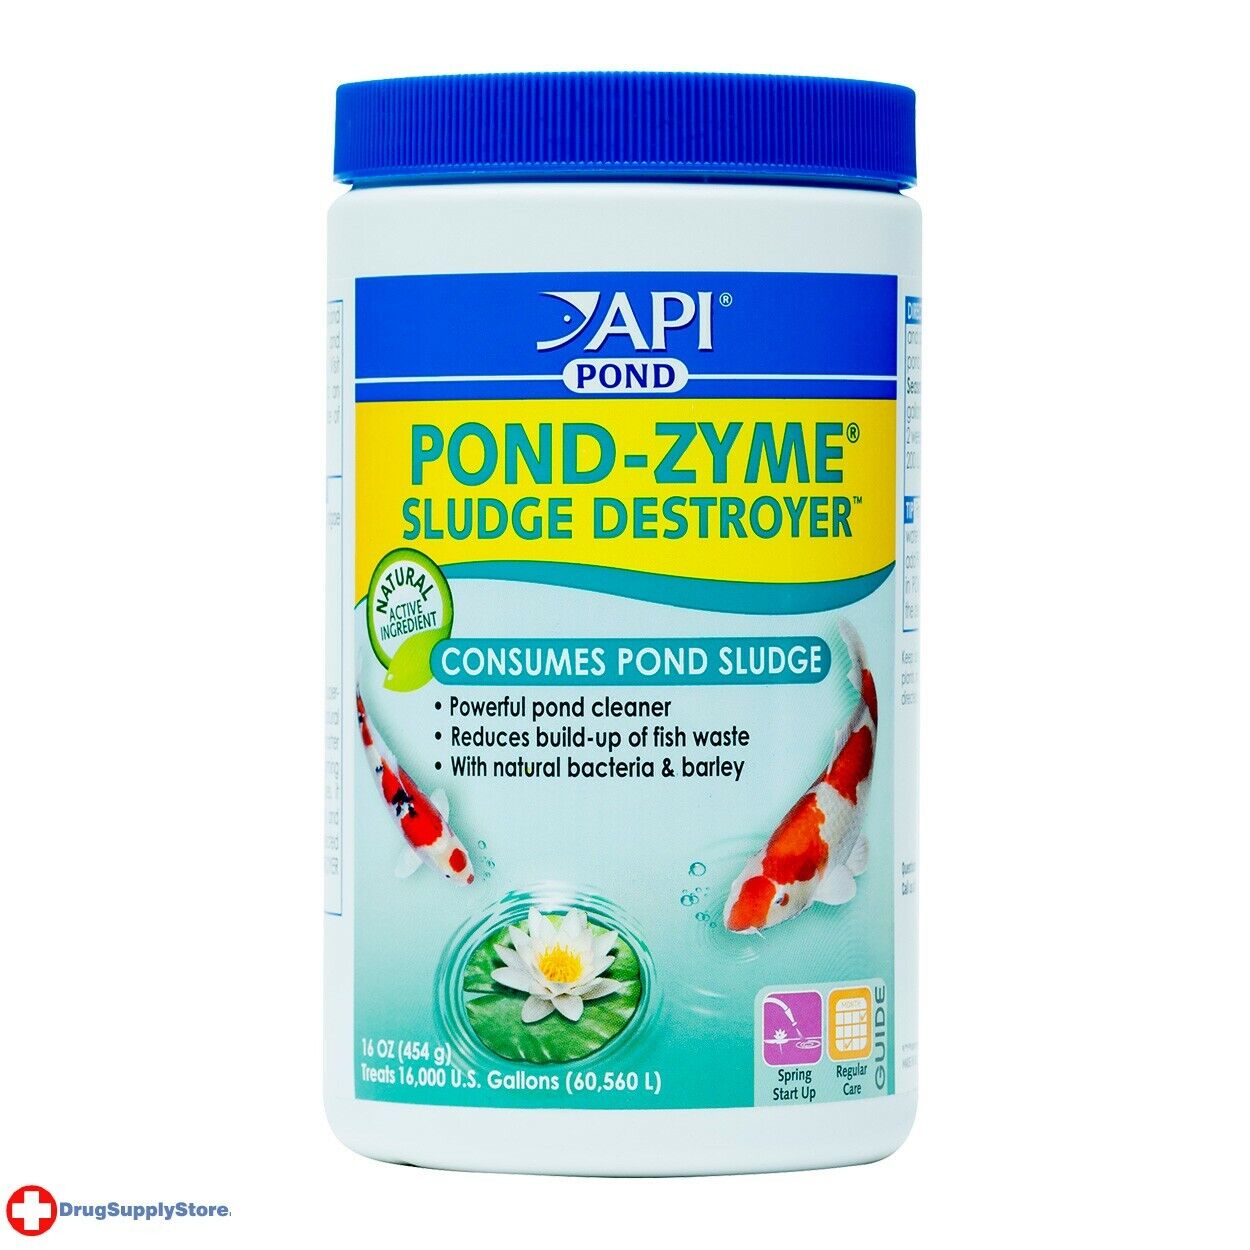 RA Pond-Zyme with Barley - OFFicial 25% OFF 1 lb